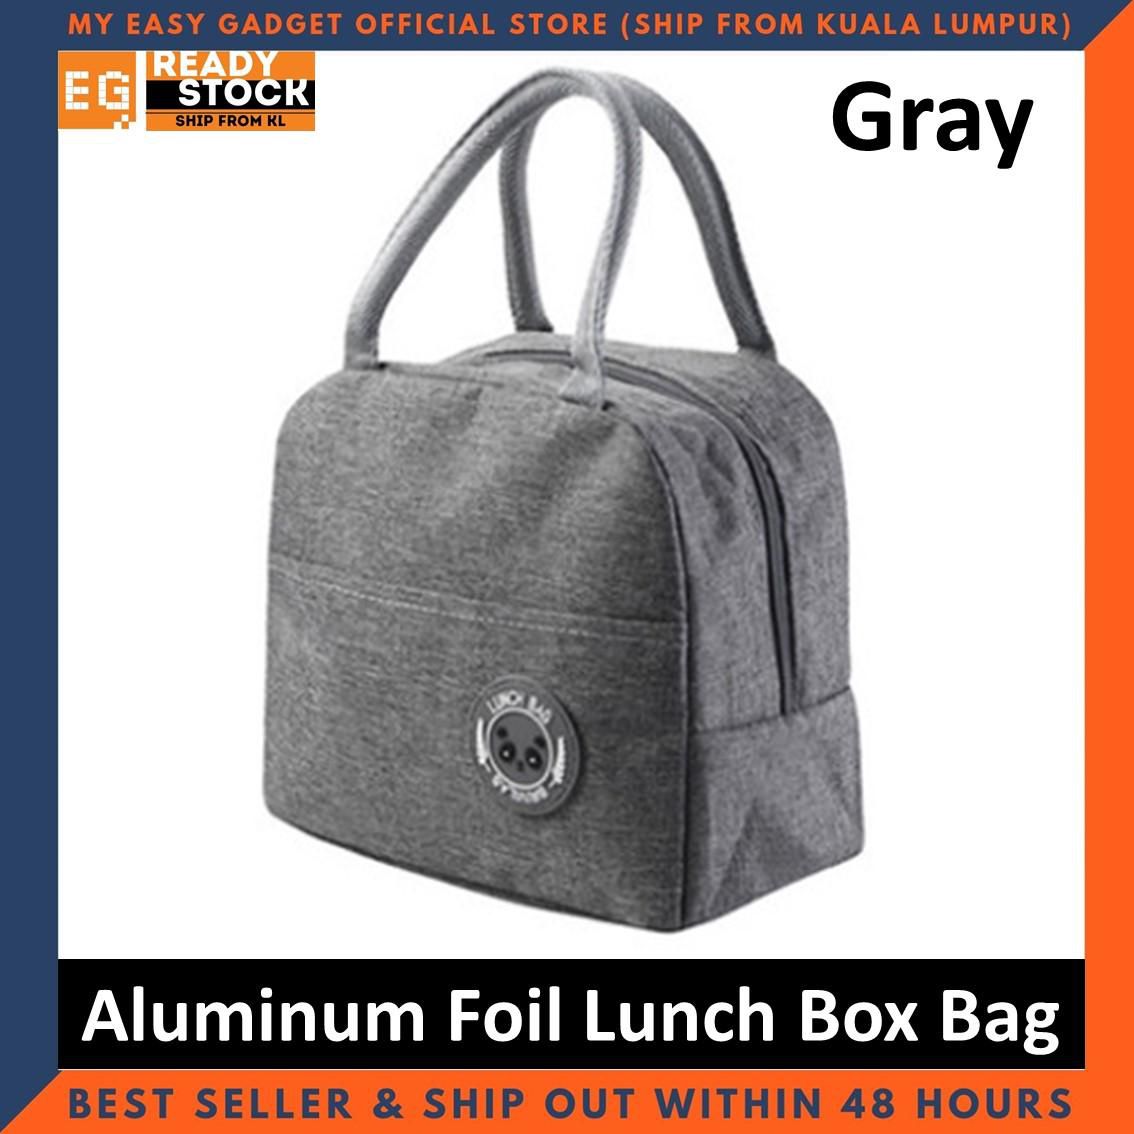 New Oxford Cloth Double Thick Aluminum Foil Lunch Box Bag (5 Colors)